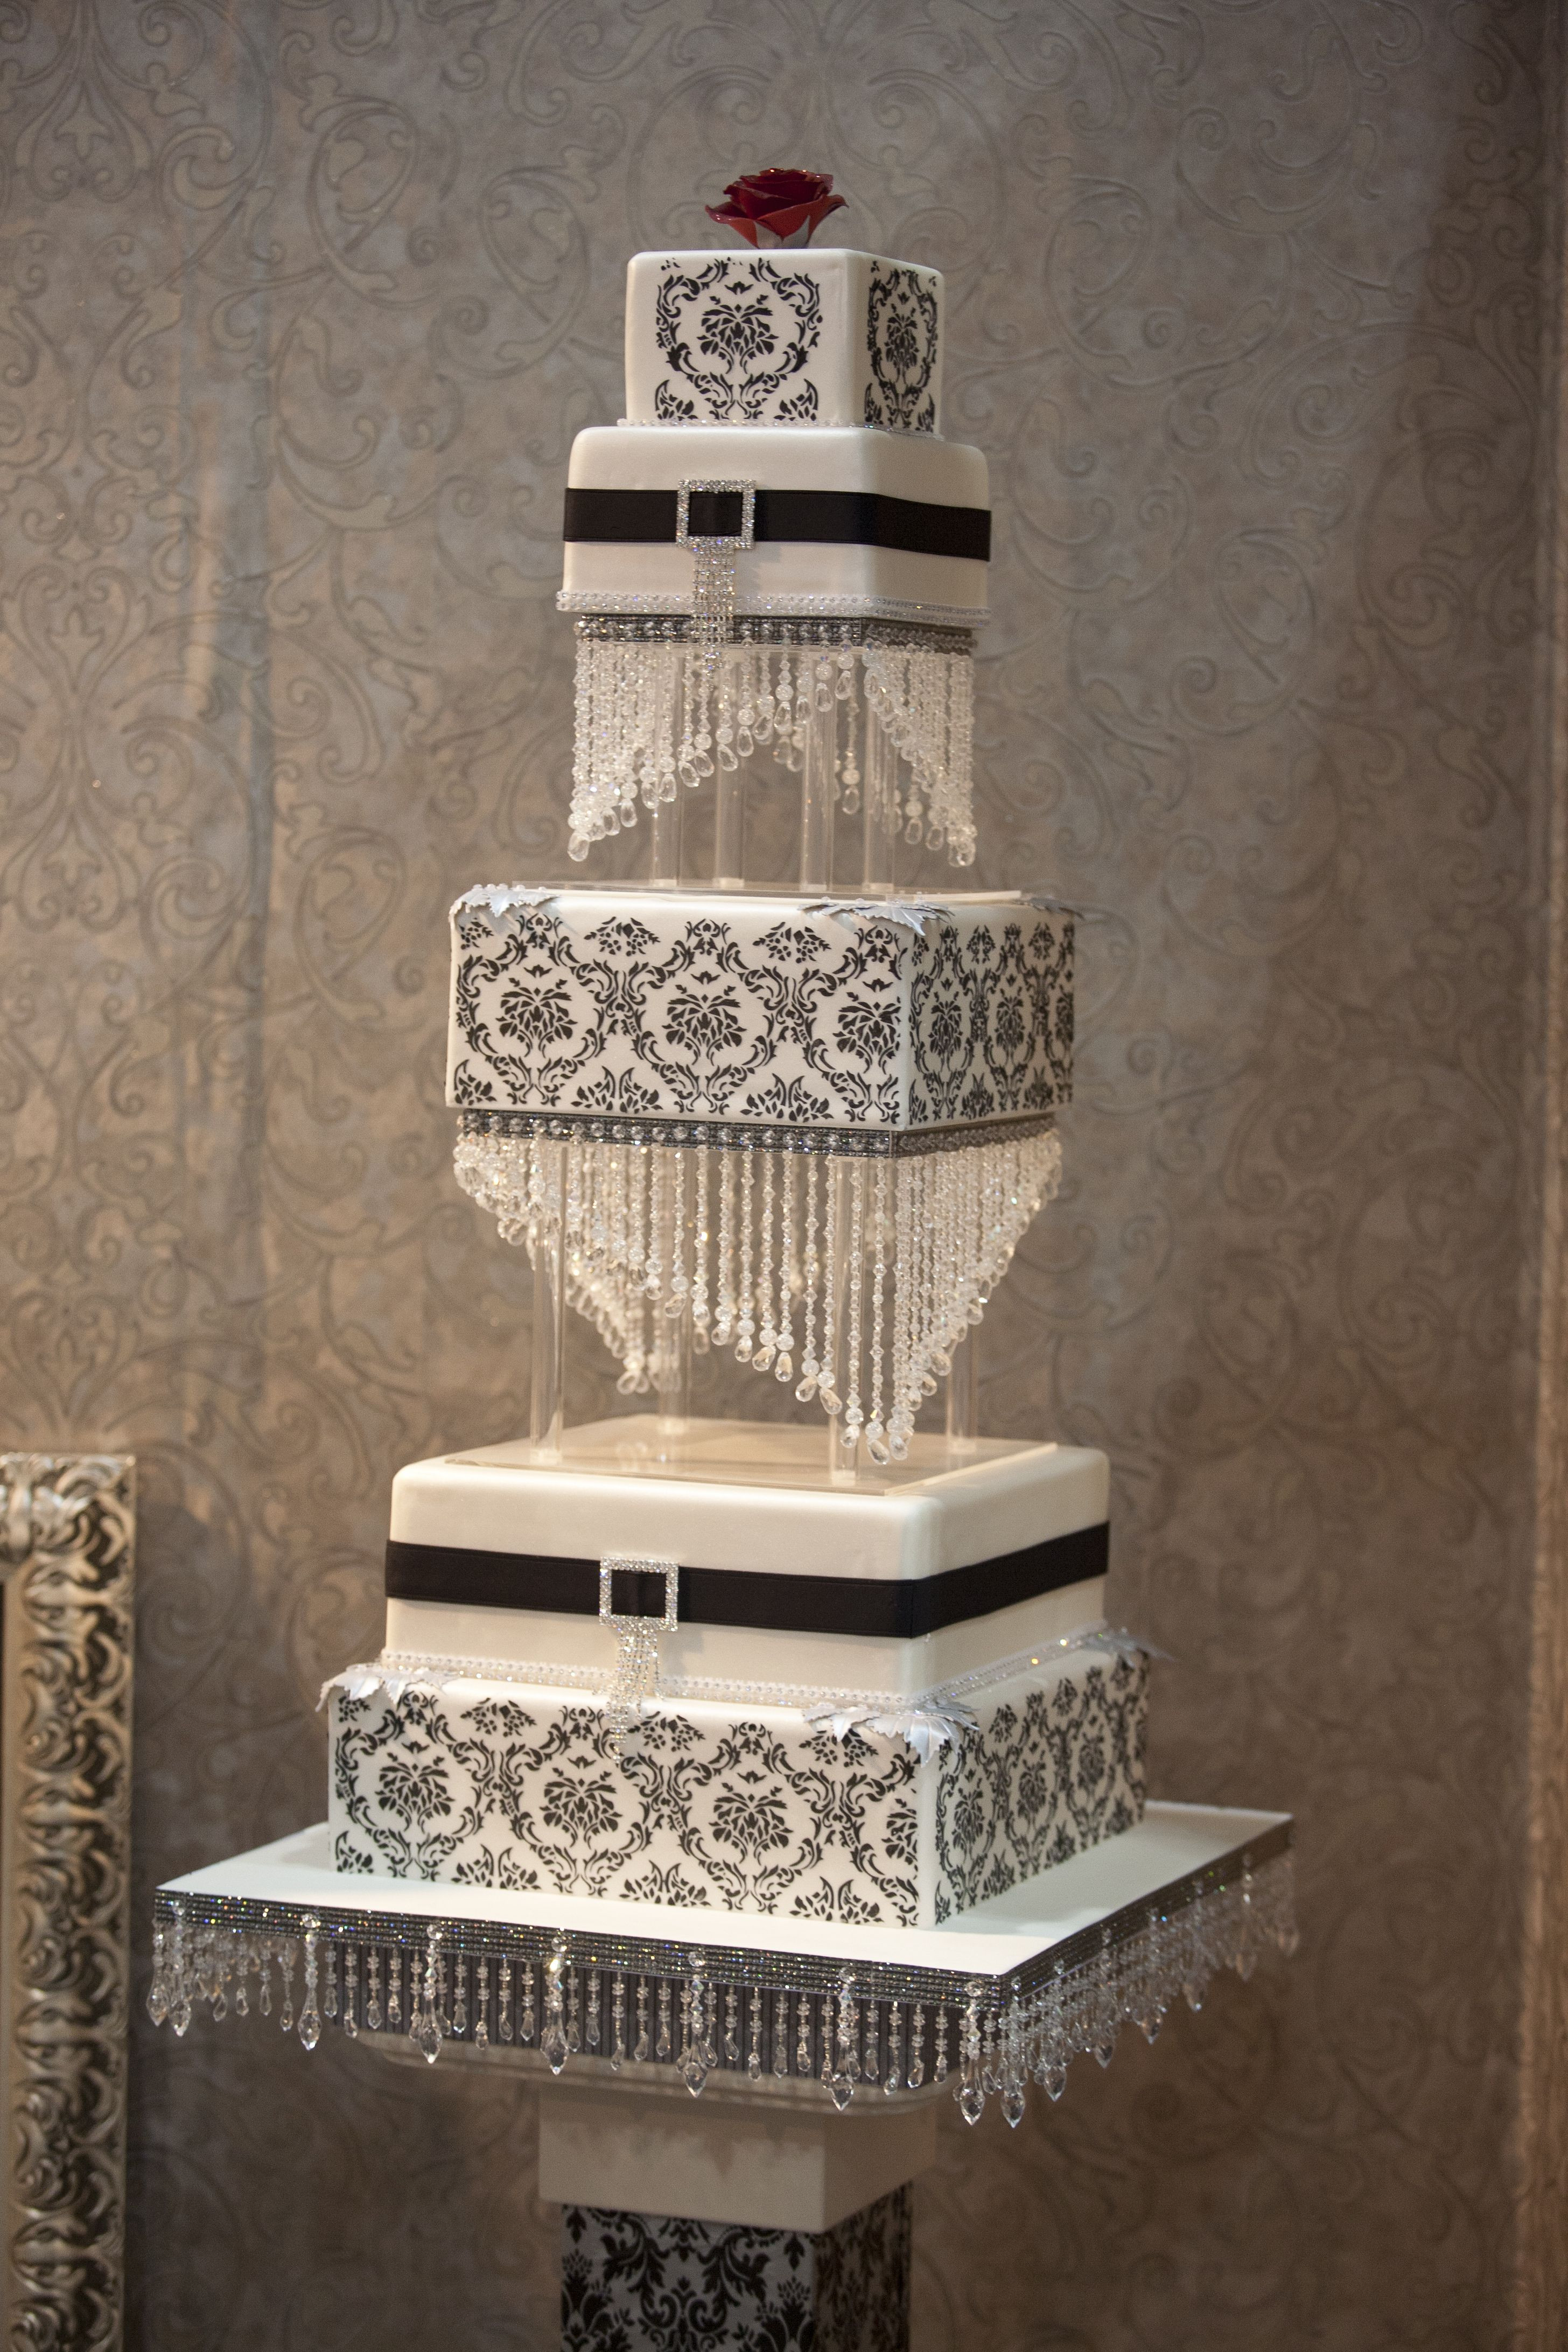 Glamorous Wedding Cakes
 Glamorous wedding cake by The Cake Genie at The Wedding